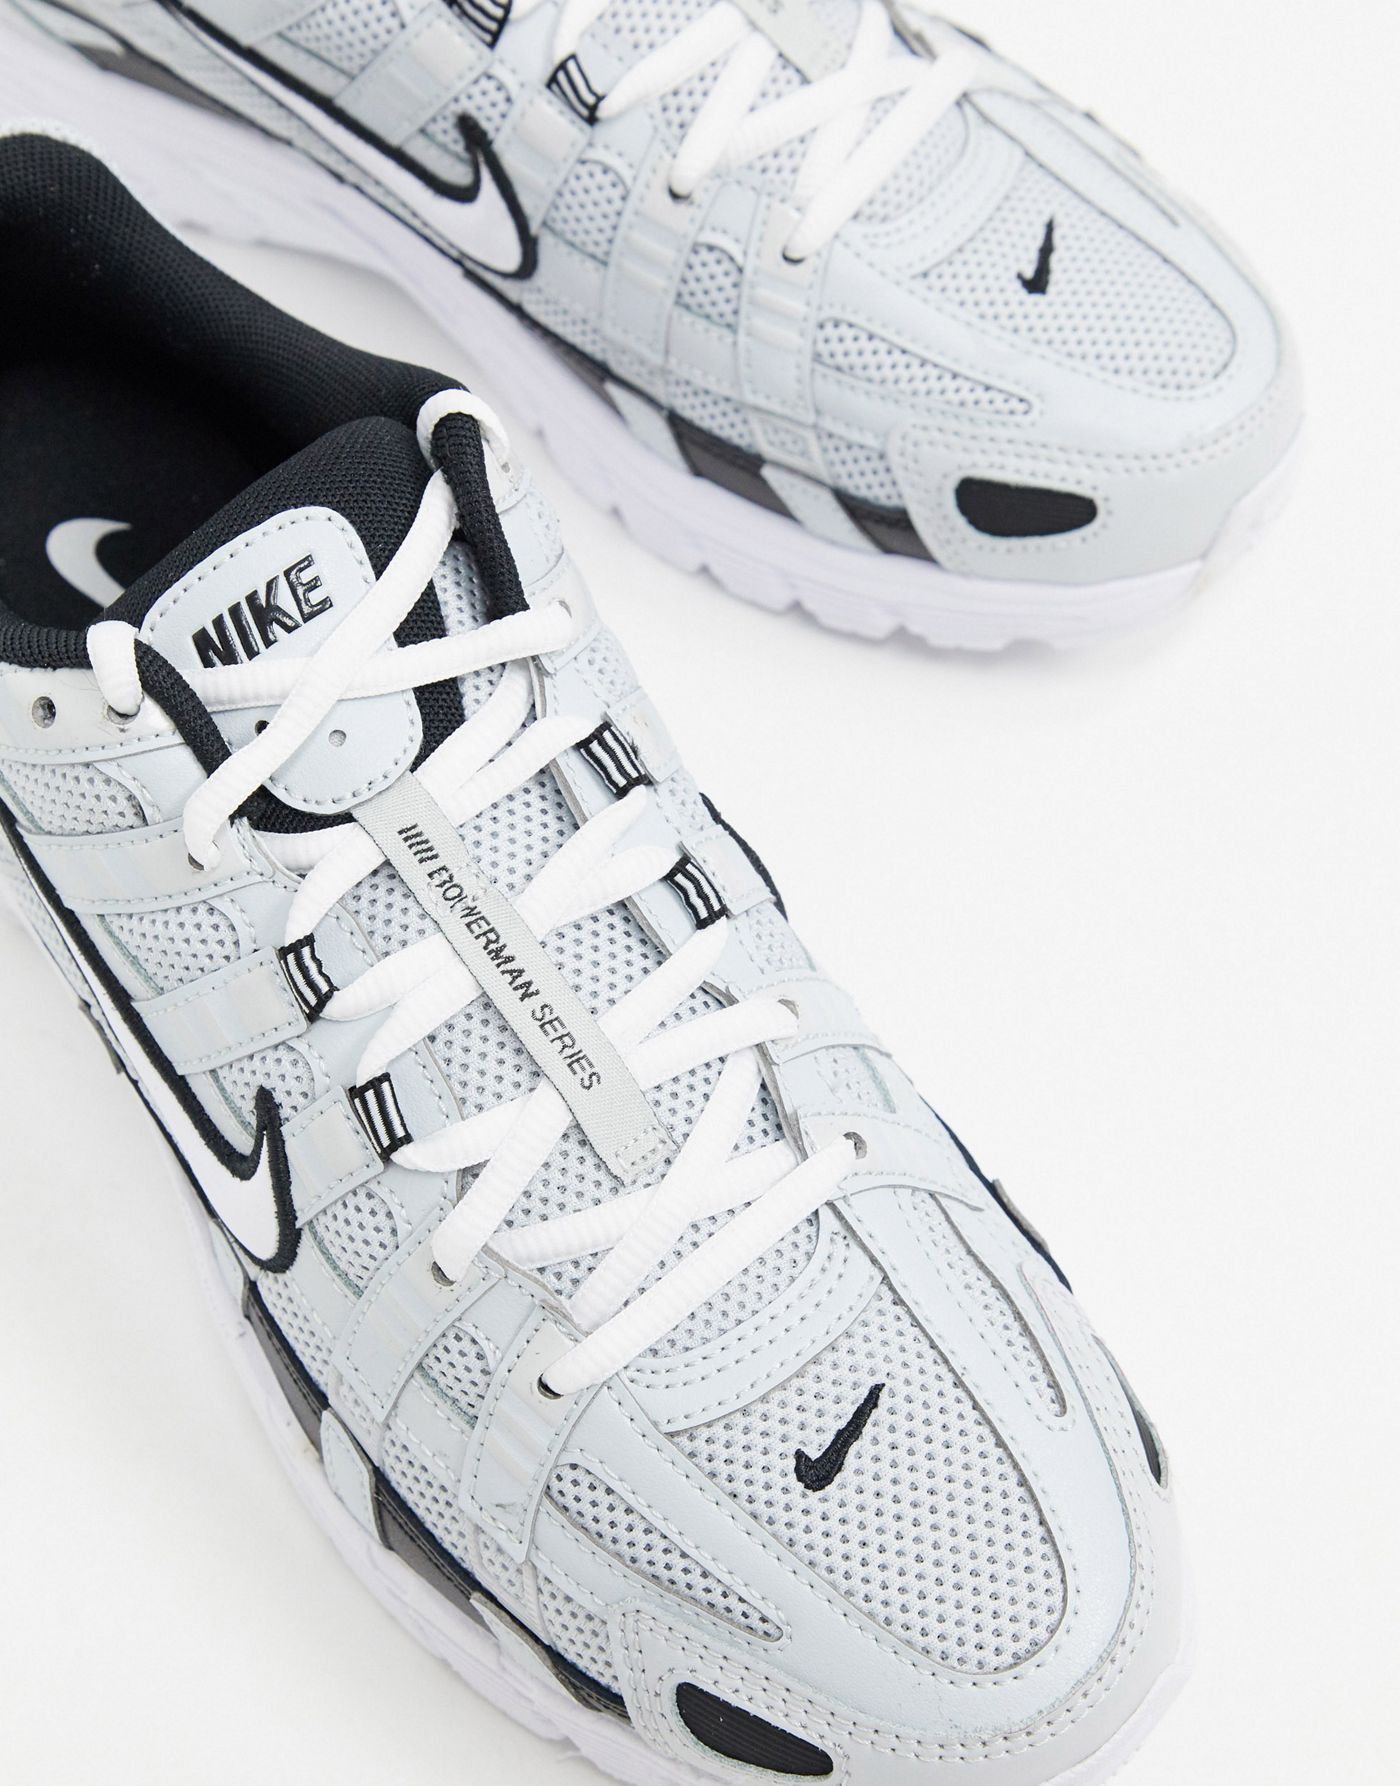 Nike P-6000 trainers in silver and white